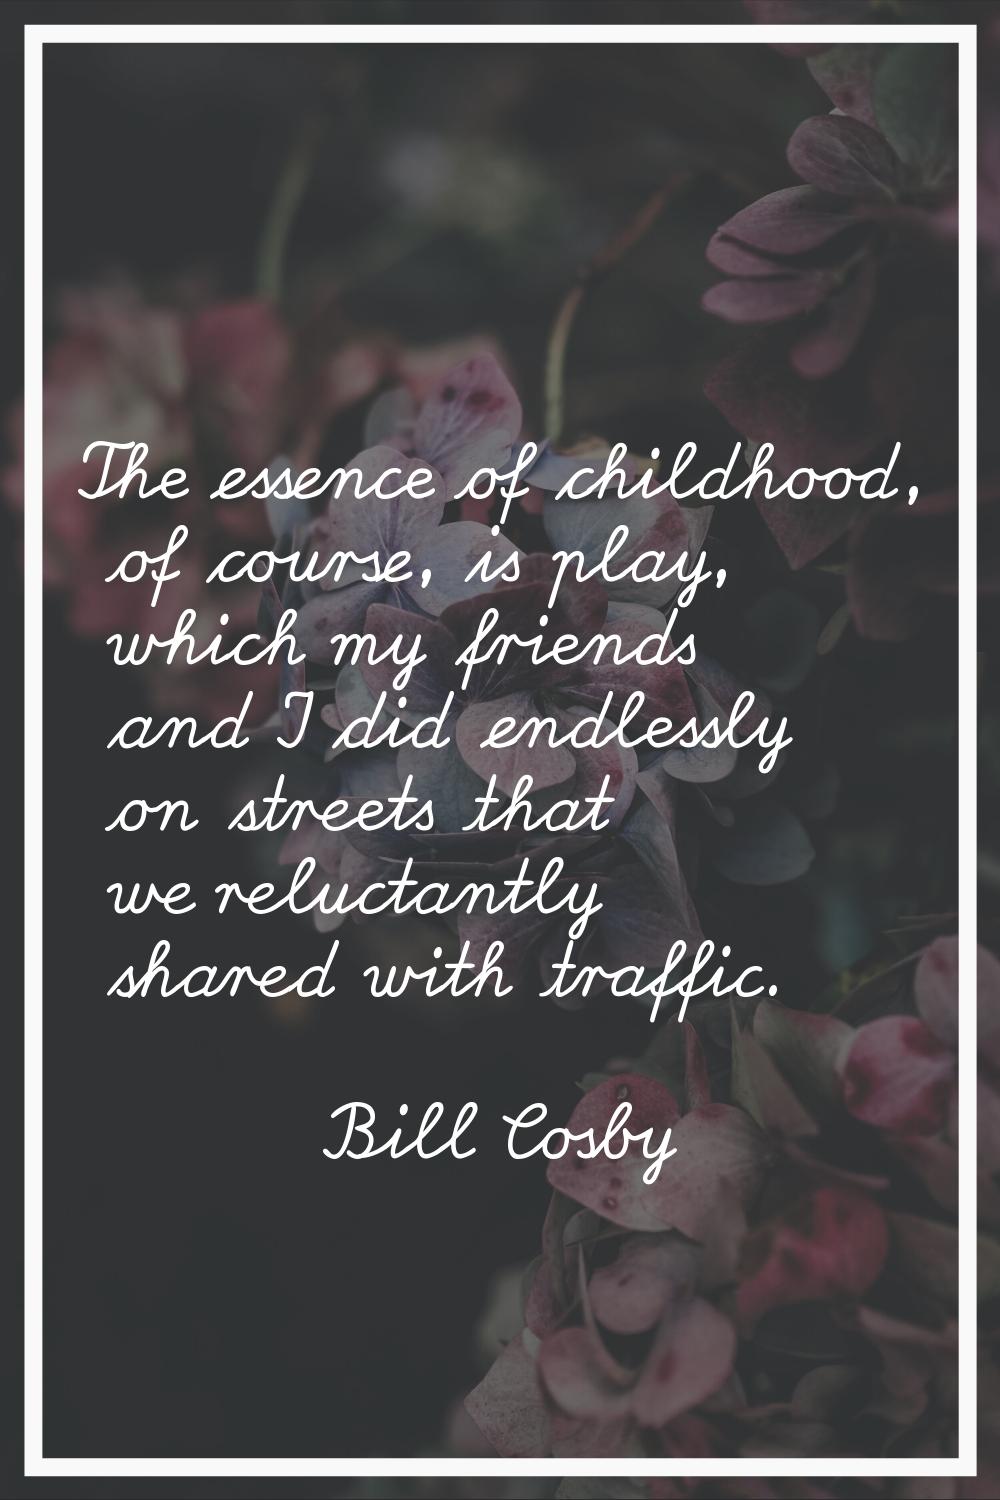 The essence of childhood, of course, is play, which my friends and I did endlessly on streets that 